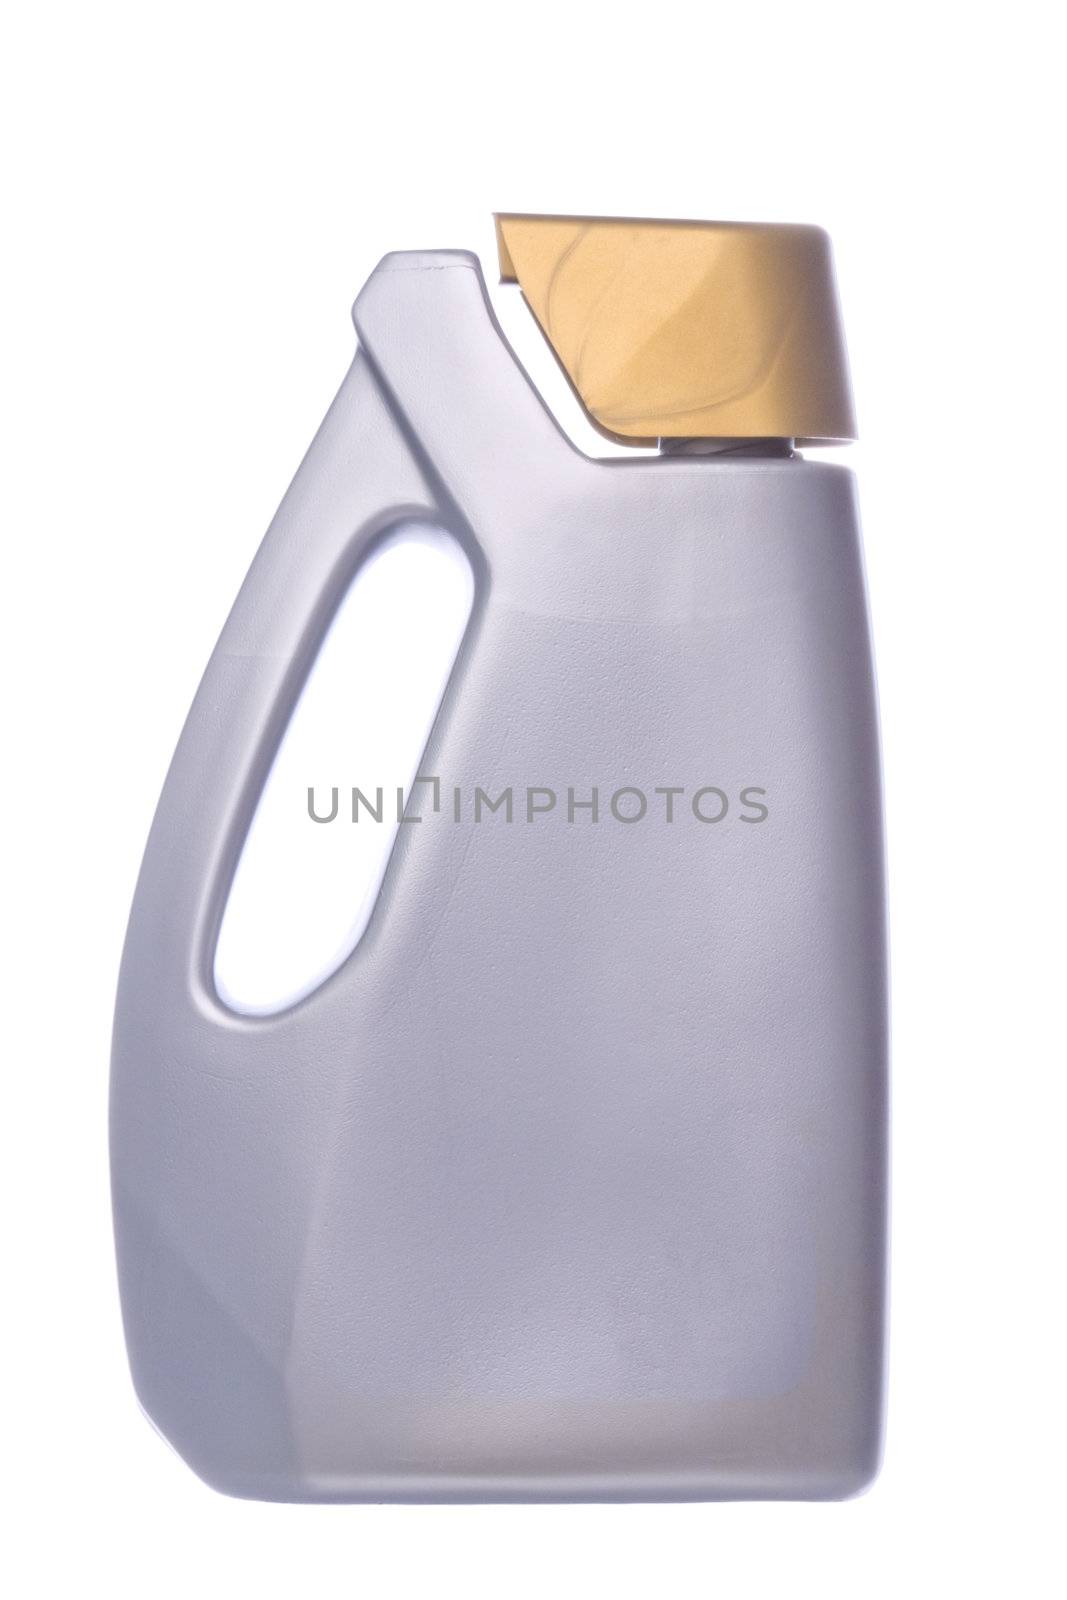 Isolated image of an engine oil can.